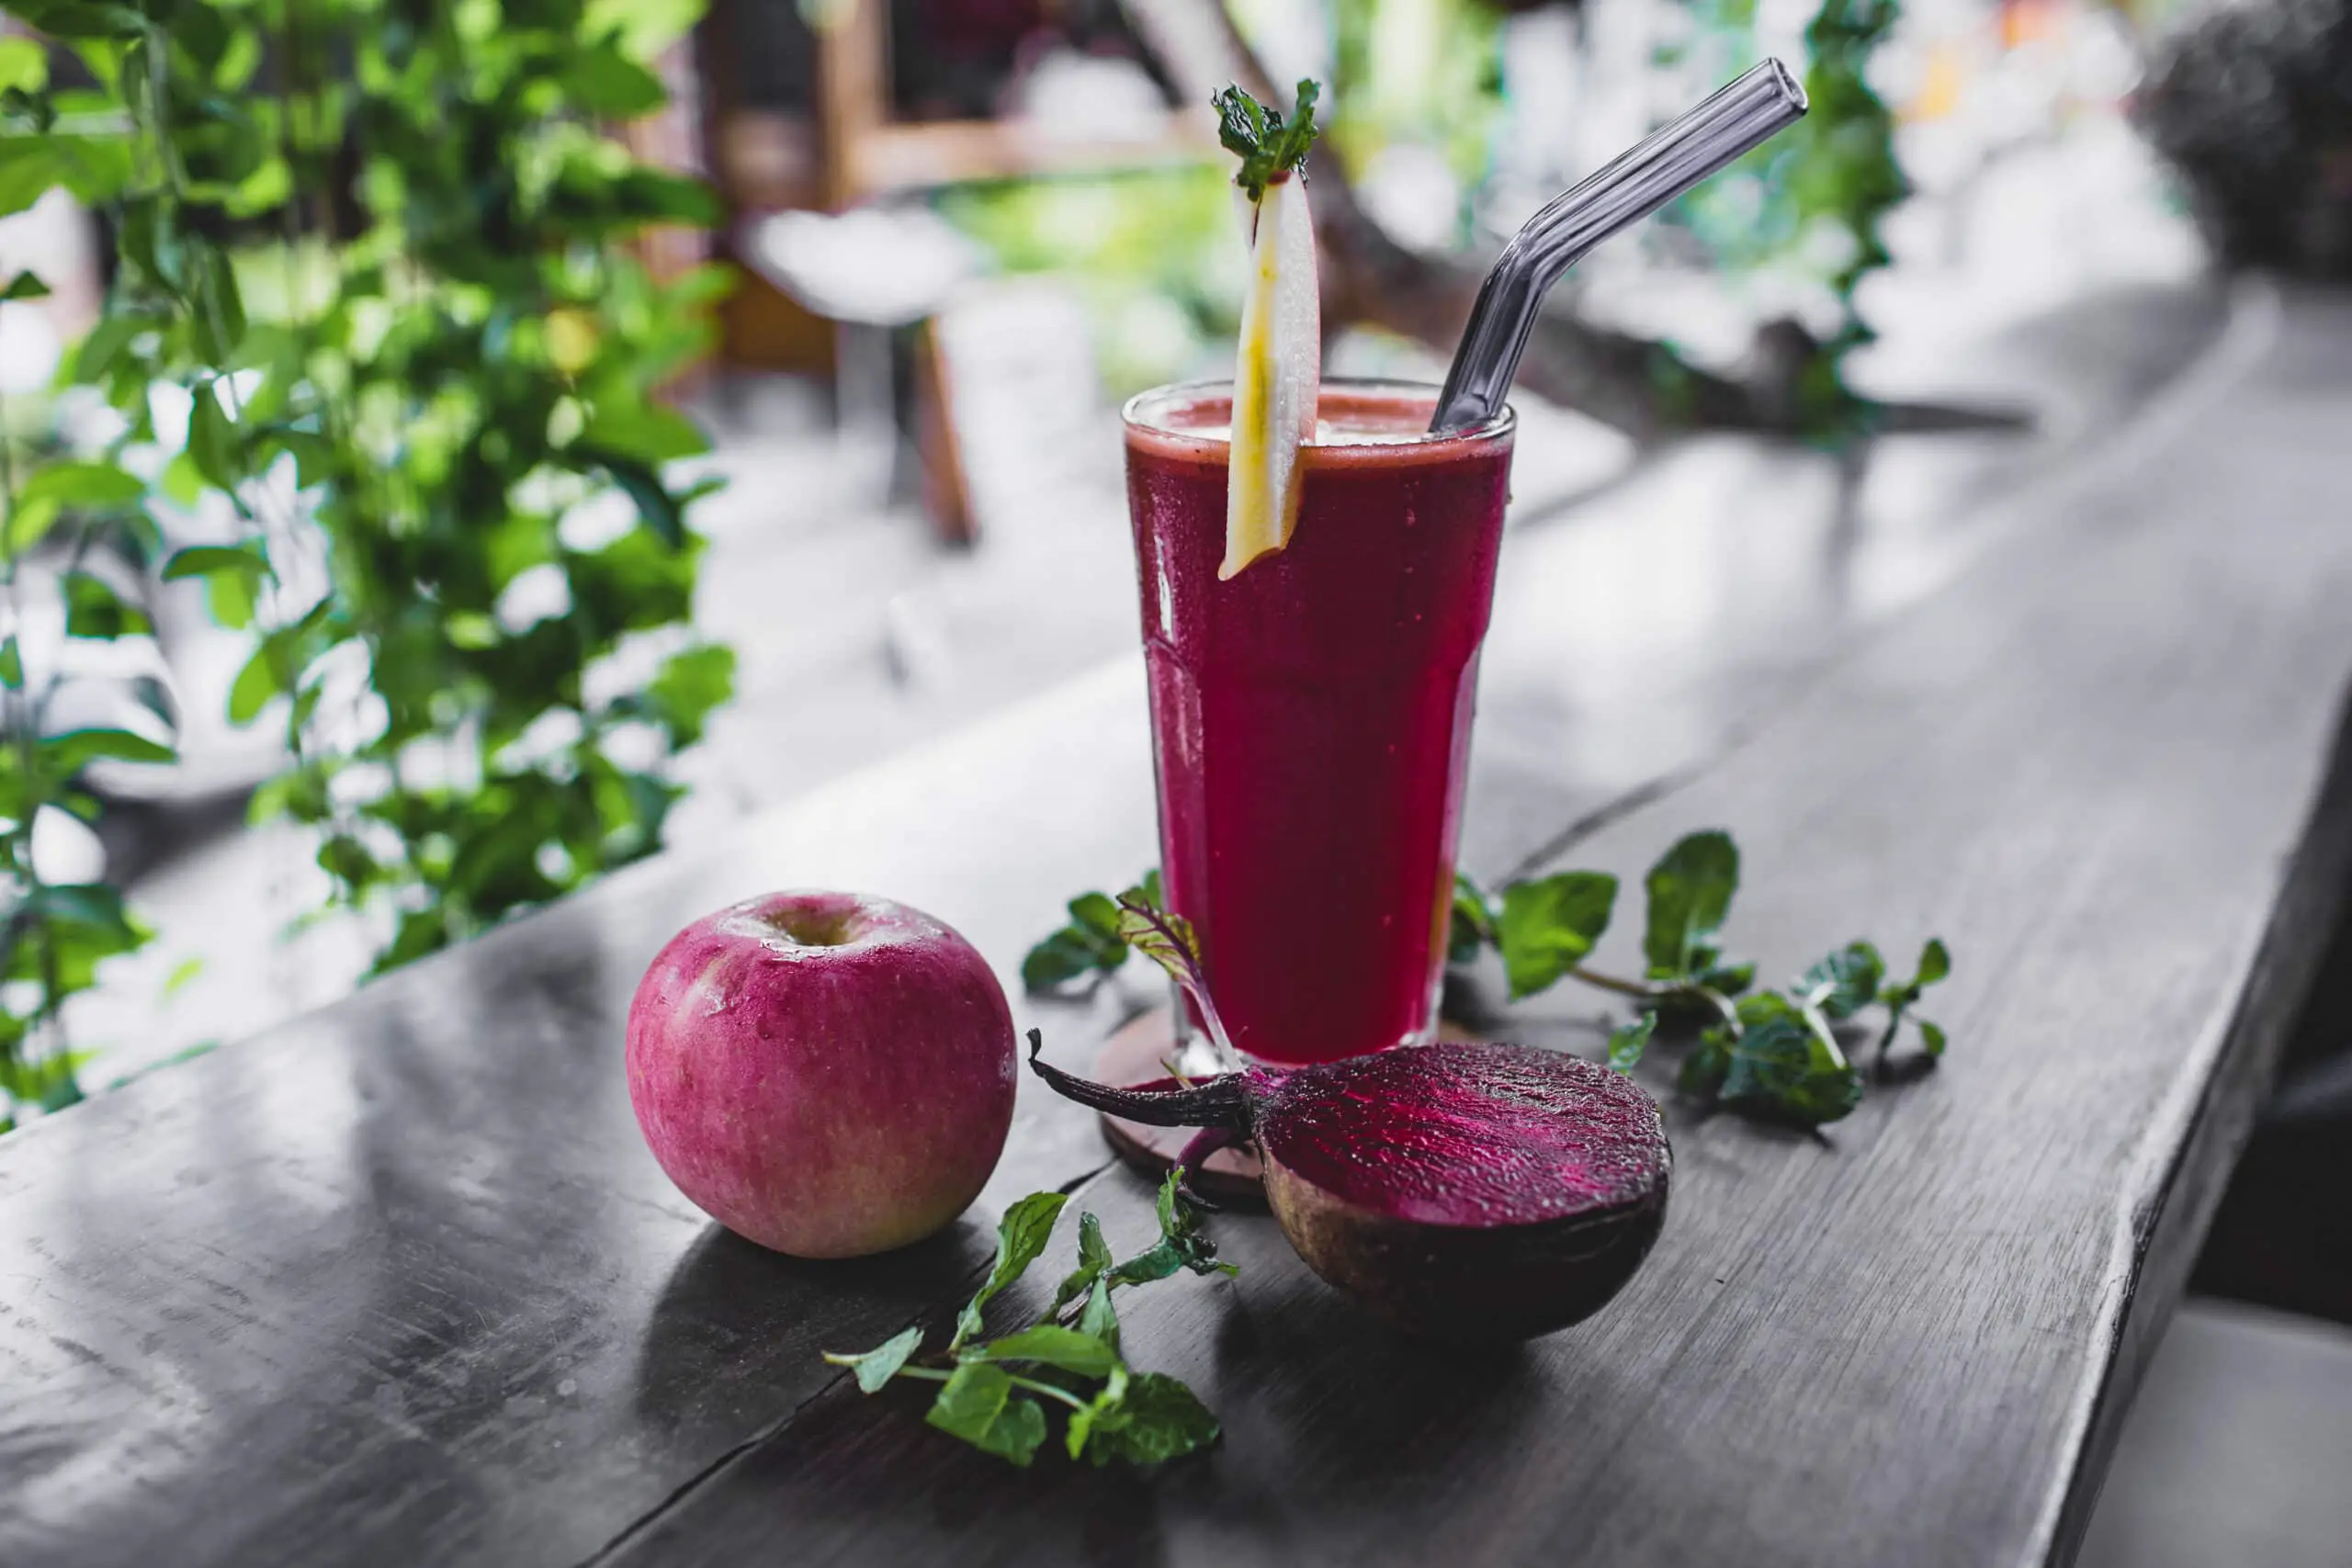 Beetroot Juice Benefits and How to Make It at Home